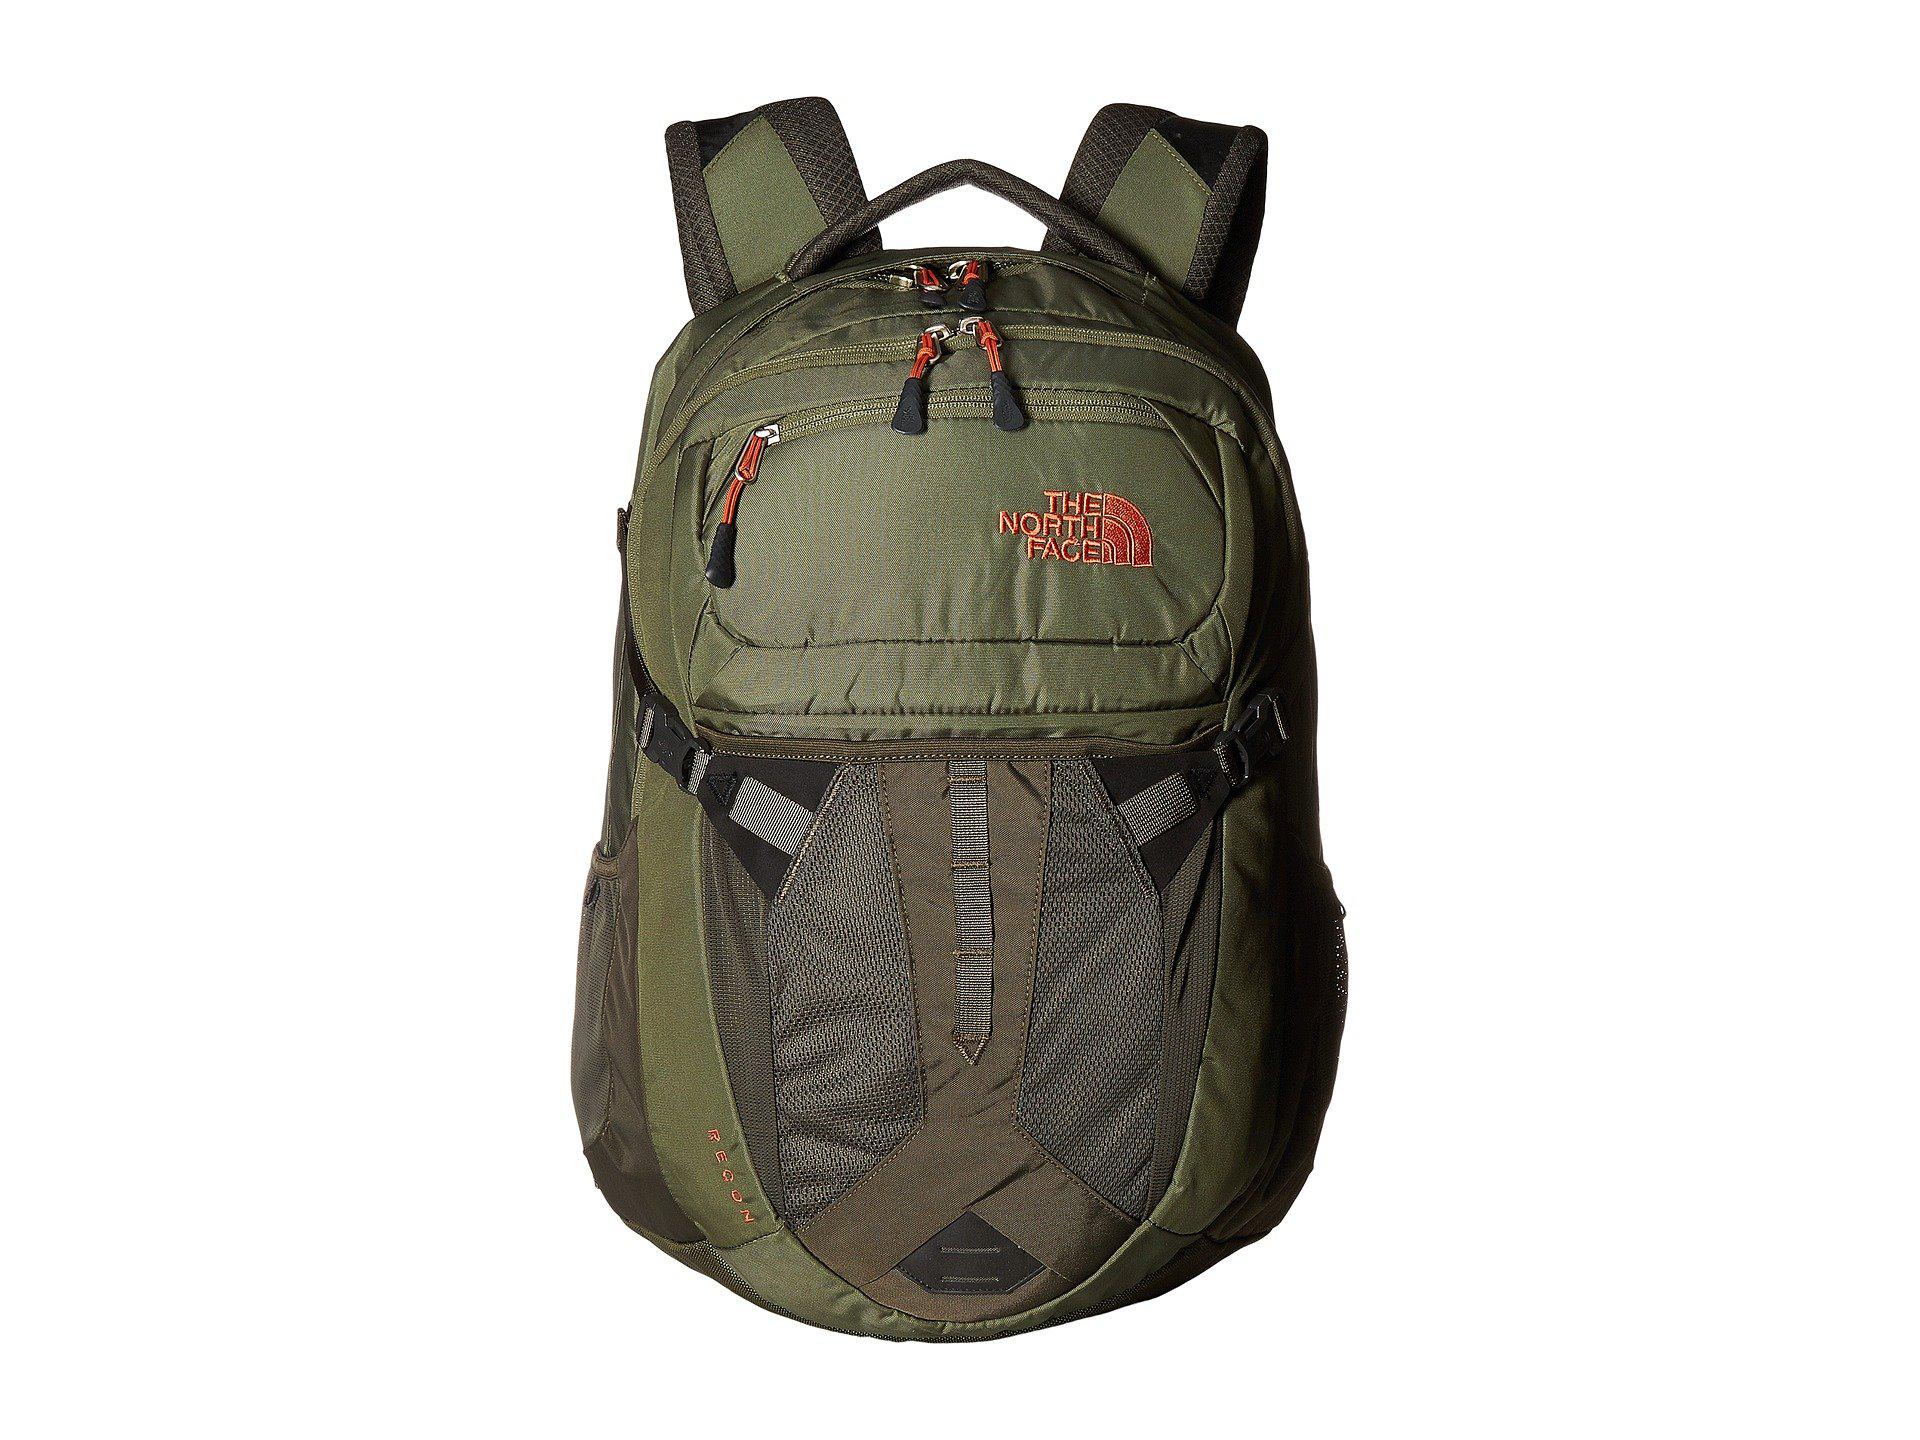 North Face Recon Backpack Green Online Shopping For Women Men Kids Fashion Lifestyle Free Delivery Returns